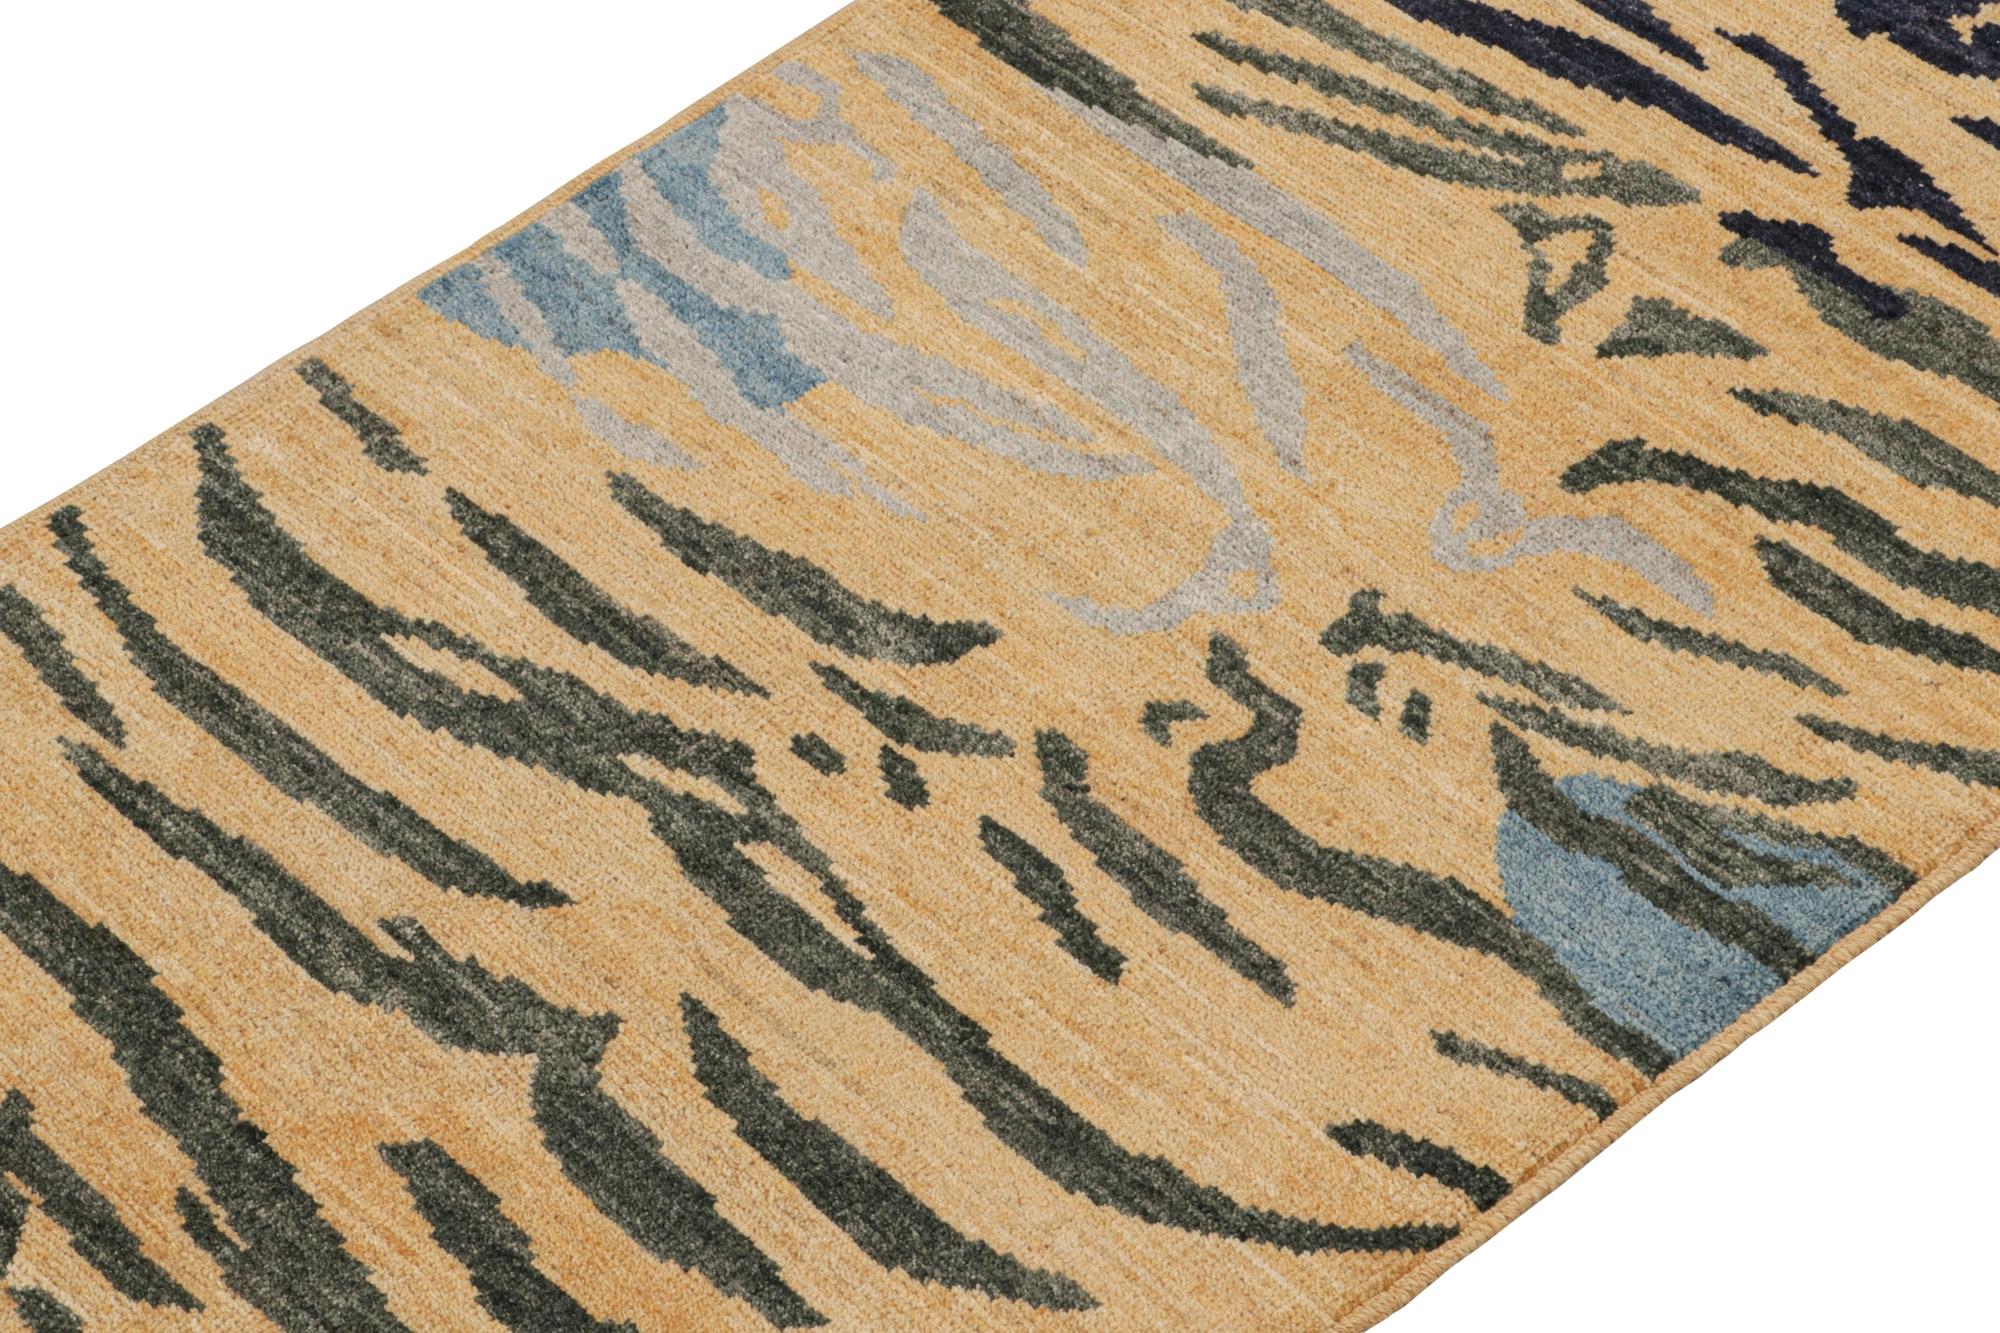 Noué à la main Tapis & Kilim's Classic Style Tiger-Skin Runner in Gold with Gray and Blue Stripes (Tapis & Kilim's Classic Style Tiger-Skin Runner in Gold with Gray and Blue Stripes) en vente